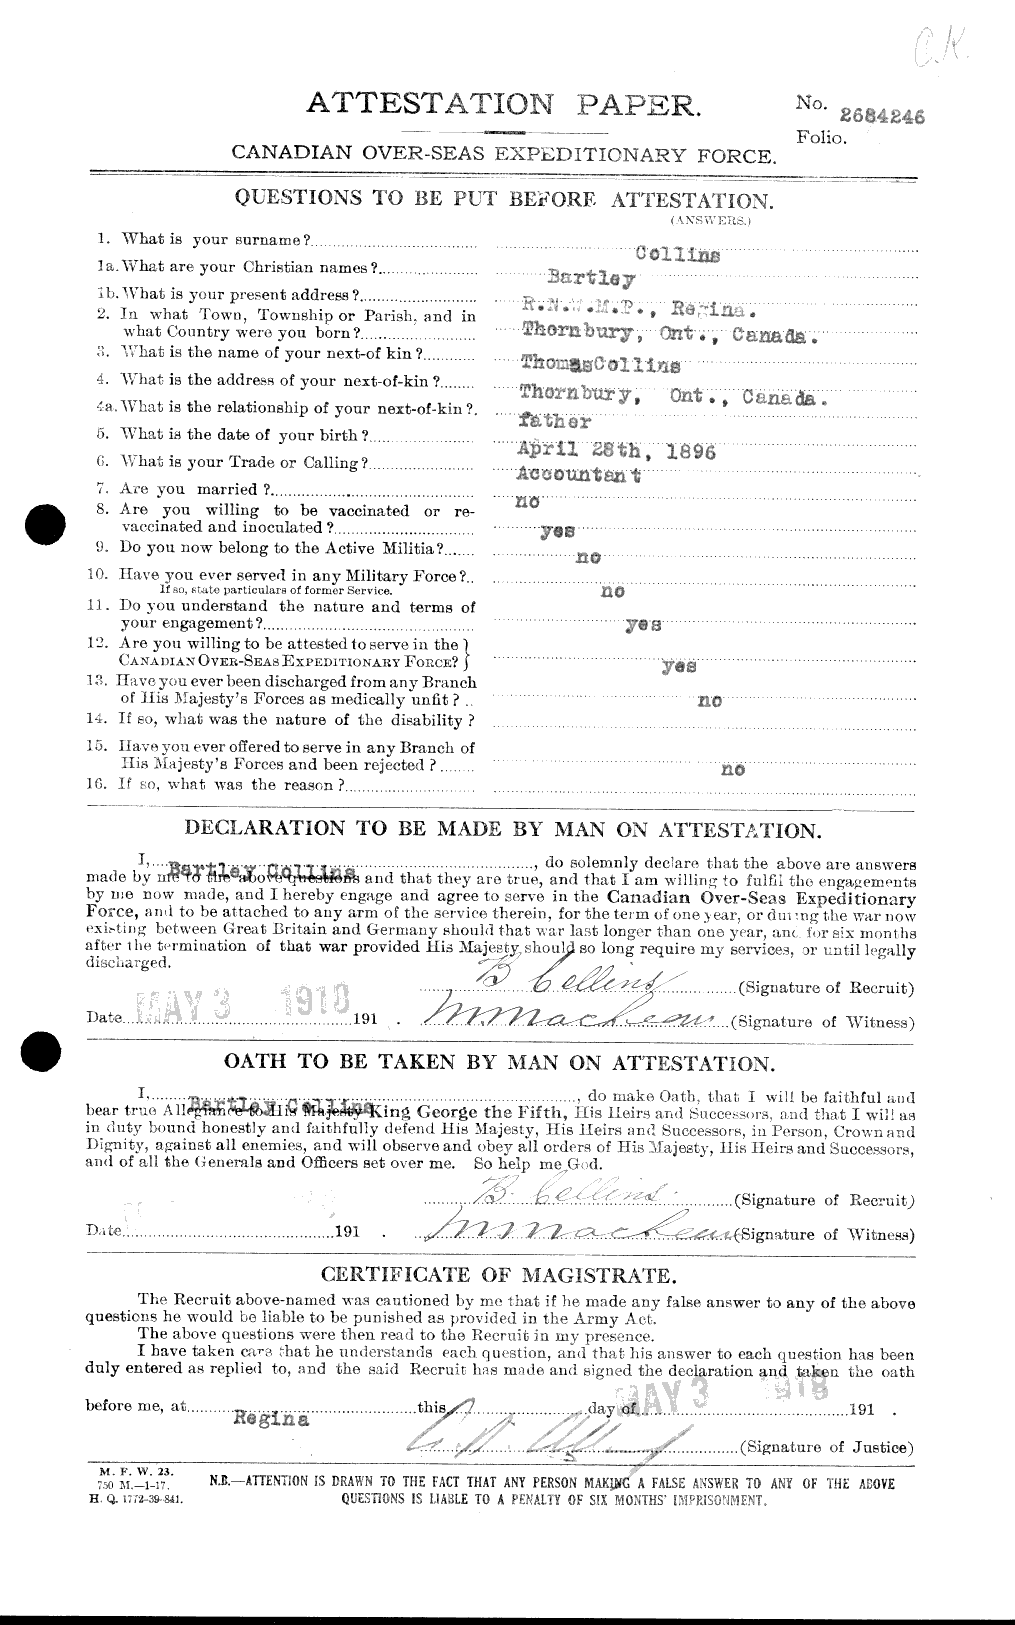 Personnel Records of the First World War - CEF 028991a